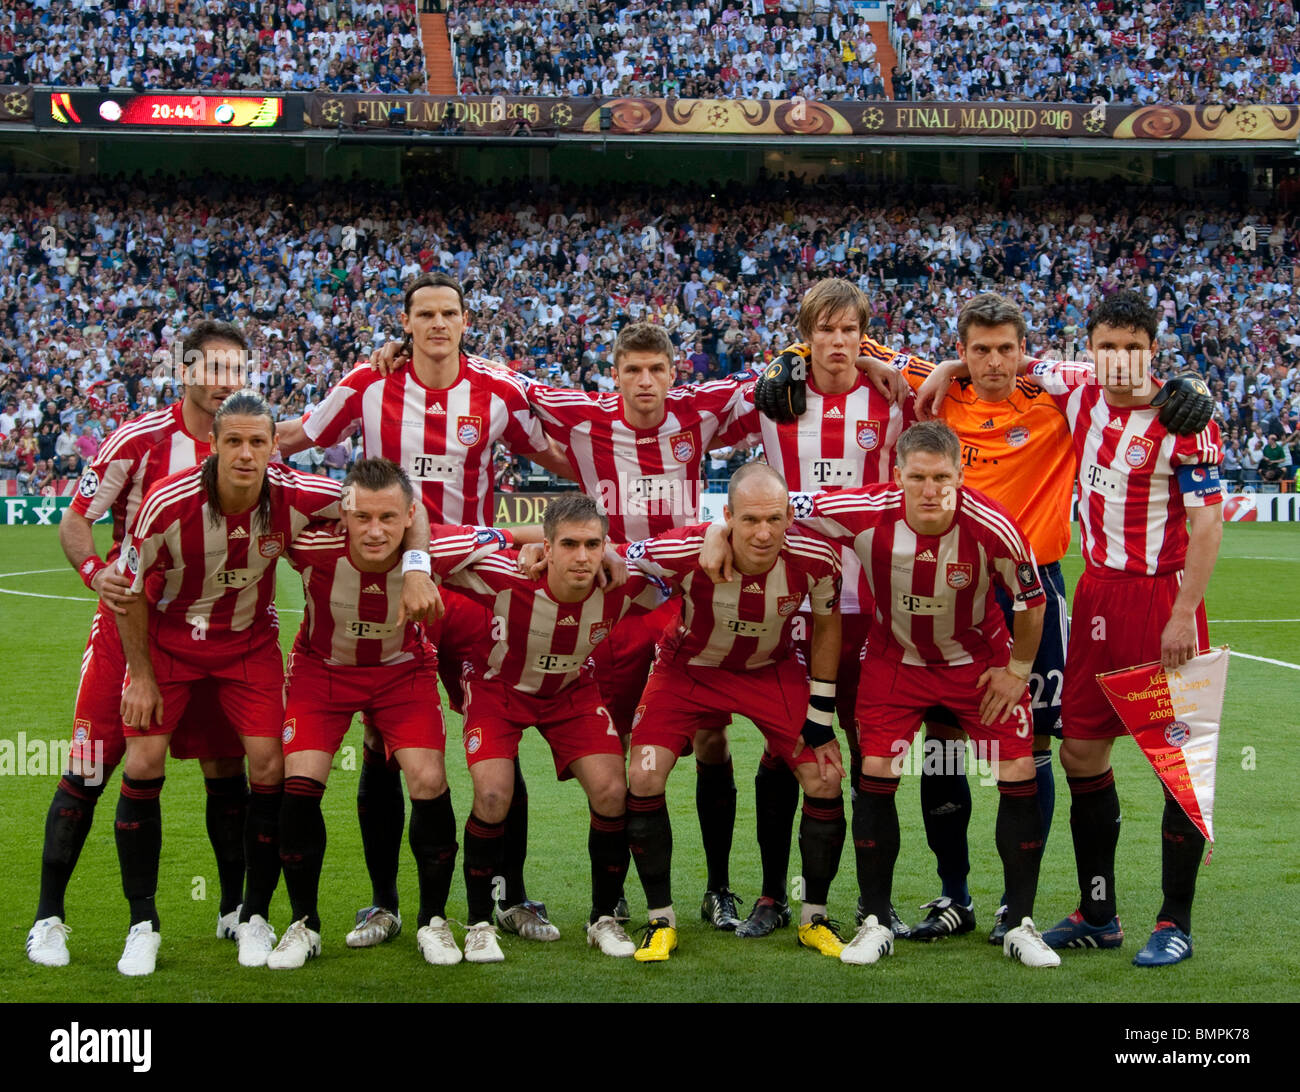 MADRID SPAIN 22-05-2010 The UEFA Champions League final competed between  Internazionale Milan and Bayern Munich Stock Photo - Alamy